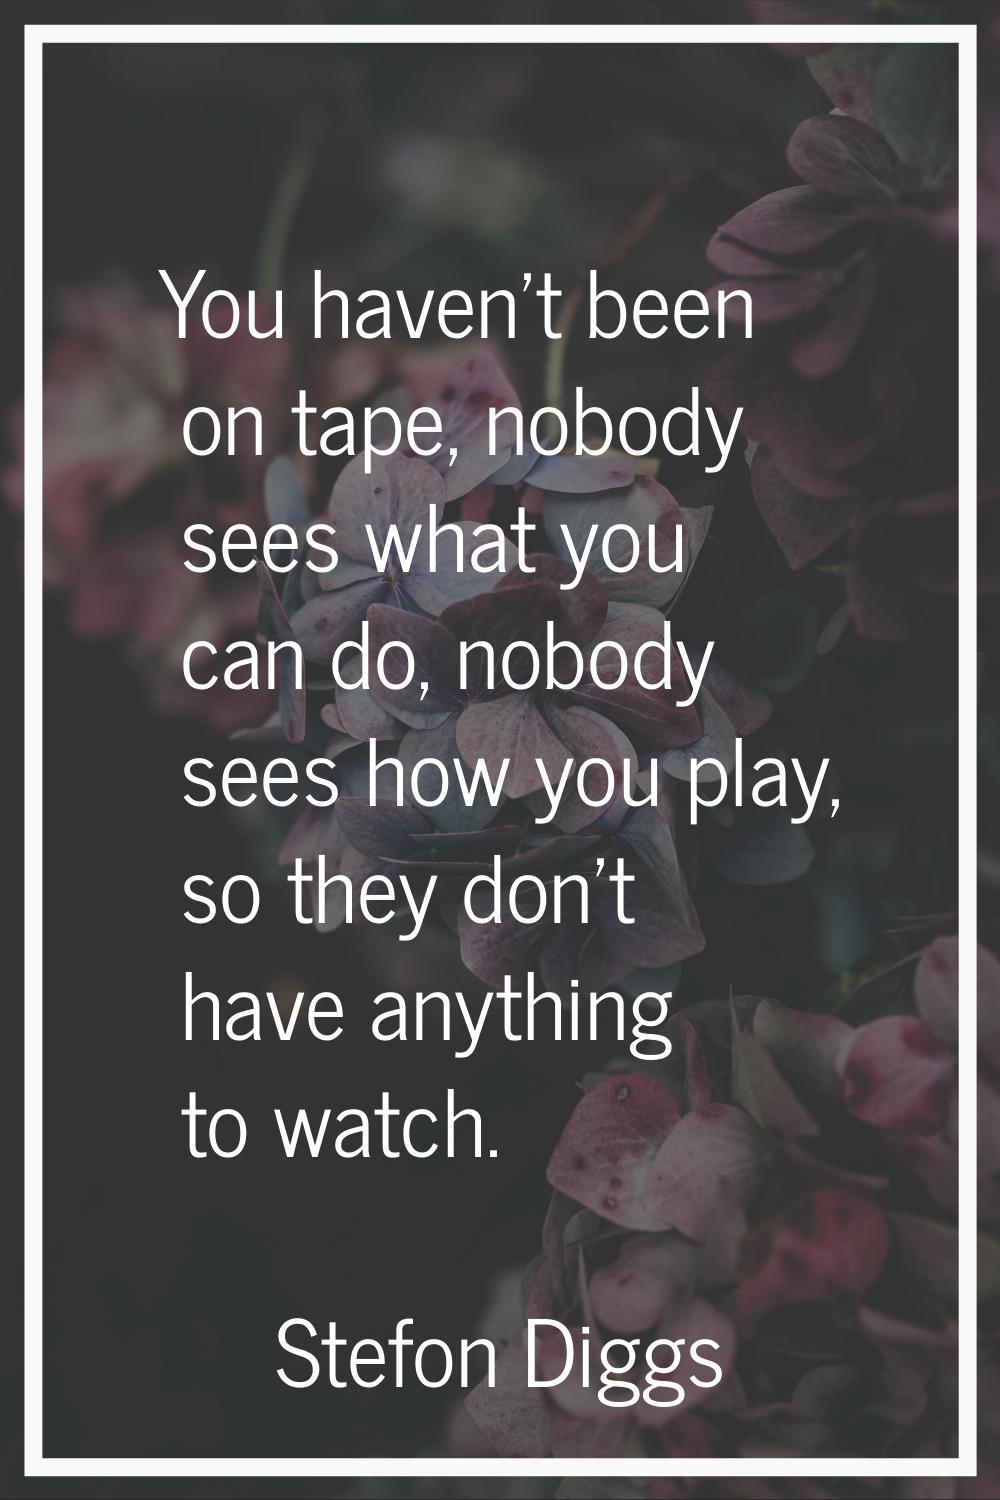 You haven't been on tape, nobody sees what you can do, nobody sees how you play, so they don't have